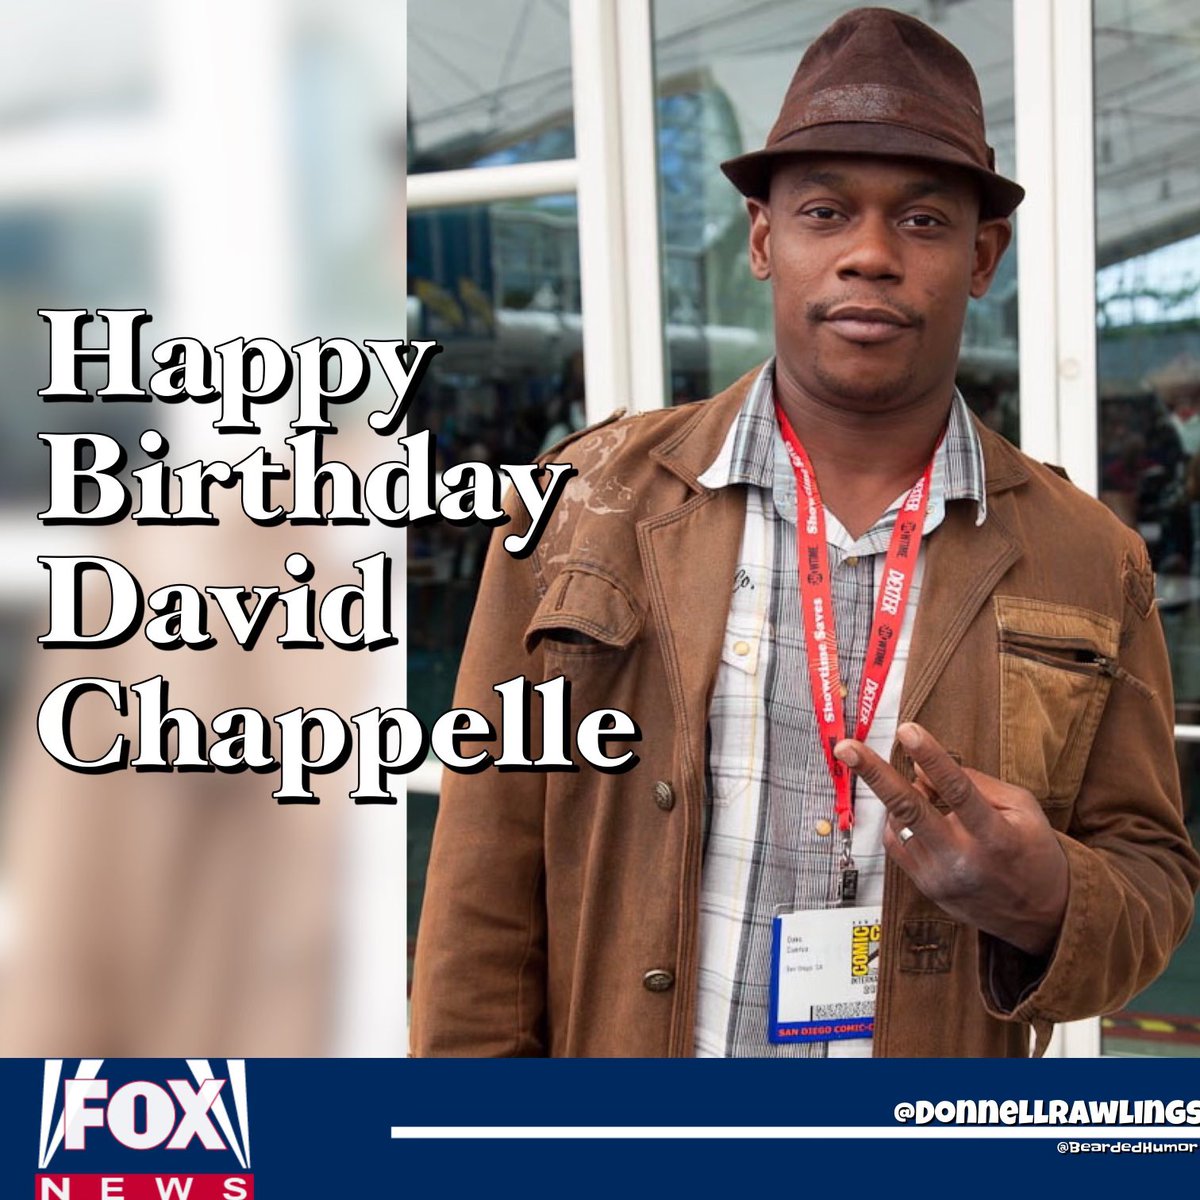 Rawlings twitter donnell Dave Chappelle,